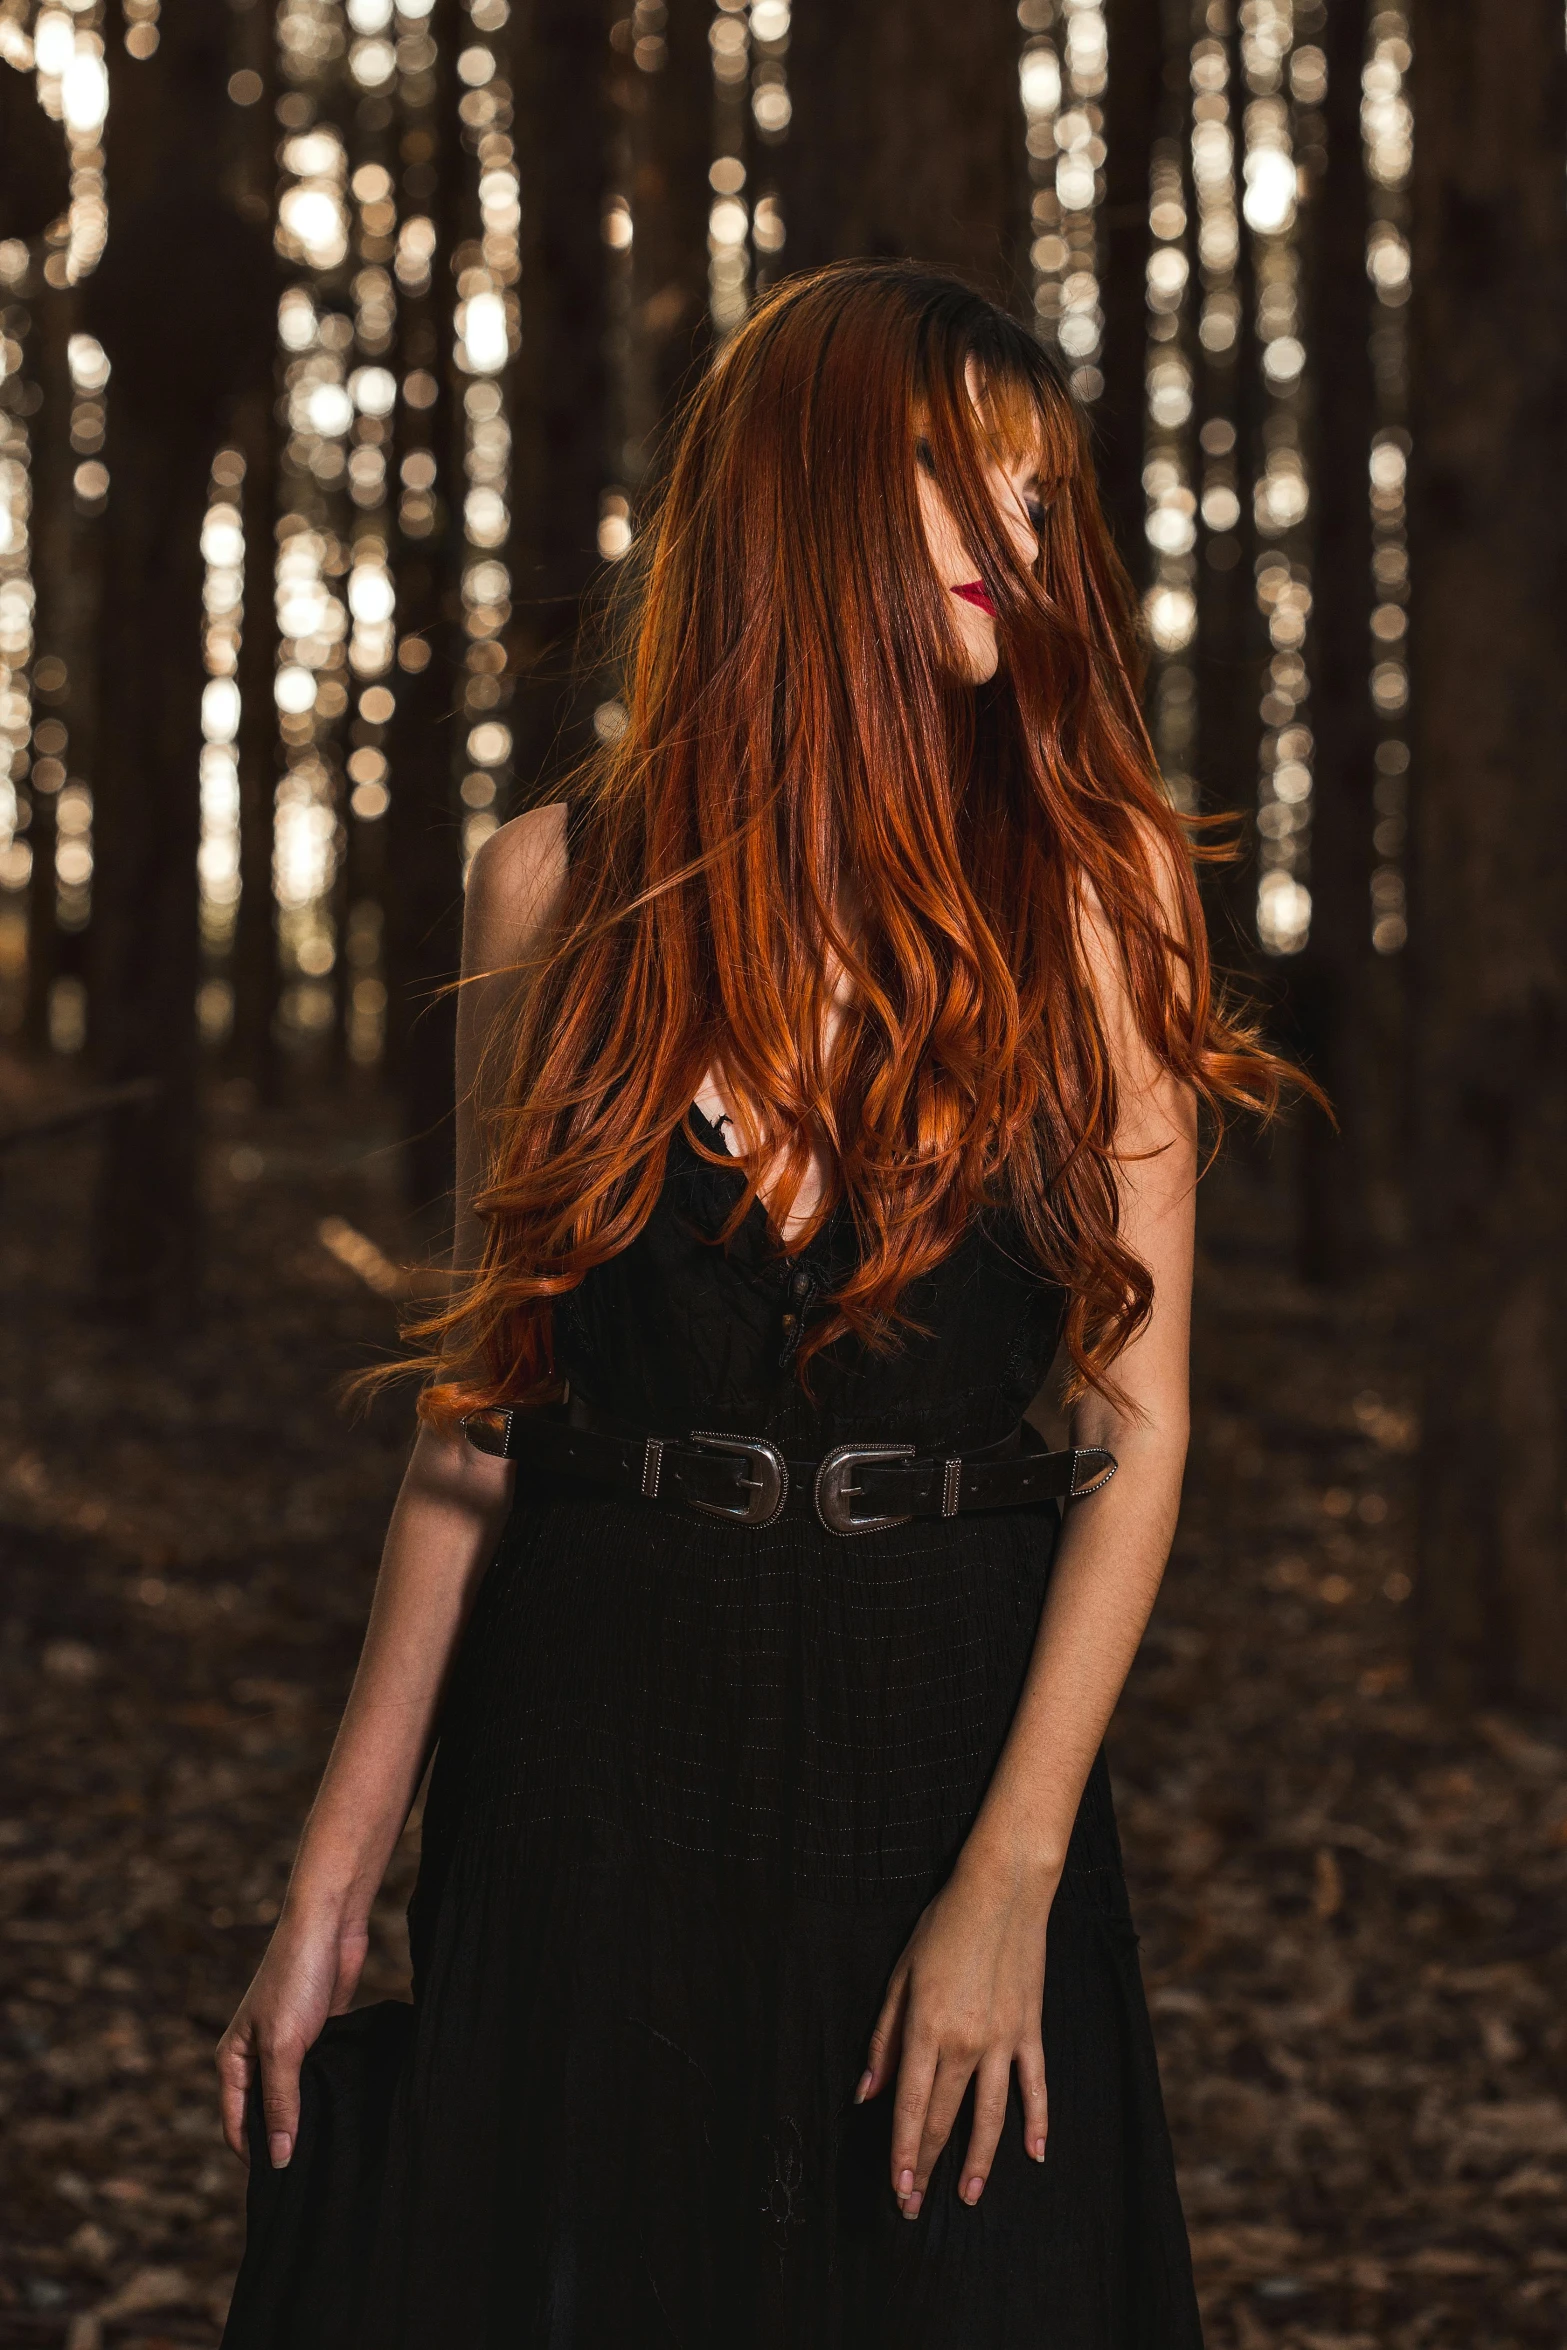 a woman with red hair and a black dress in a dark forest